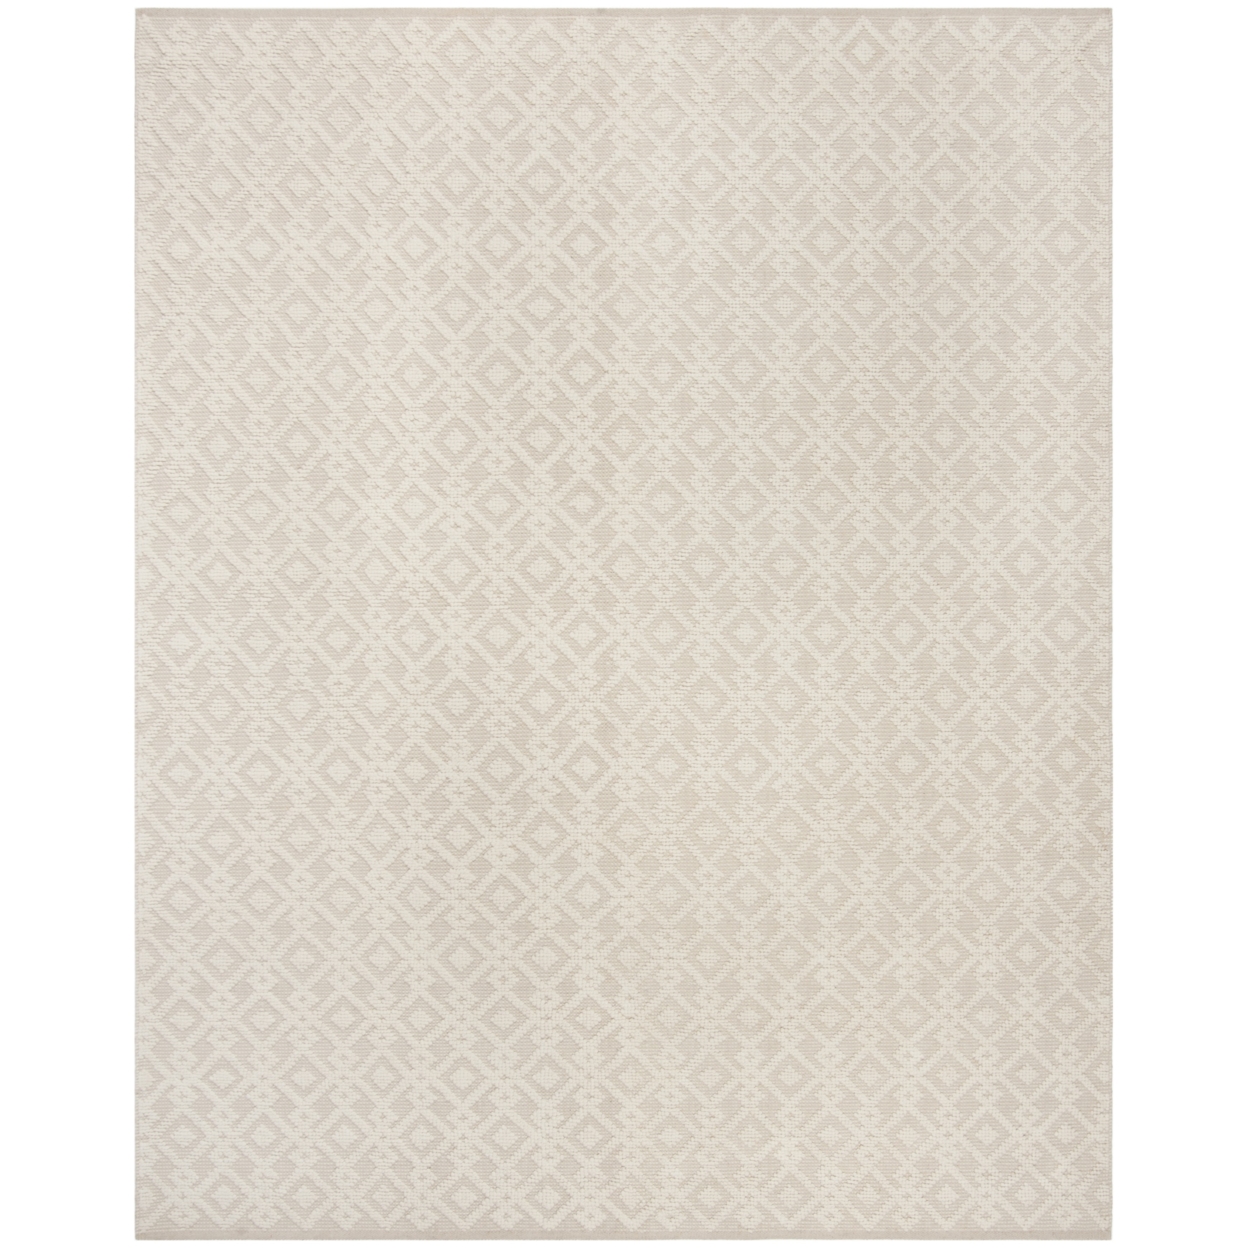 SAFAVIEH Vermont Collection VRM102A Handwoven Ivory Rug - 8 X 10